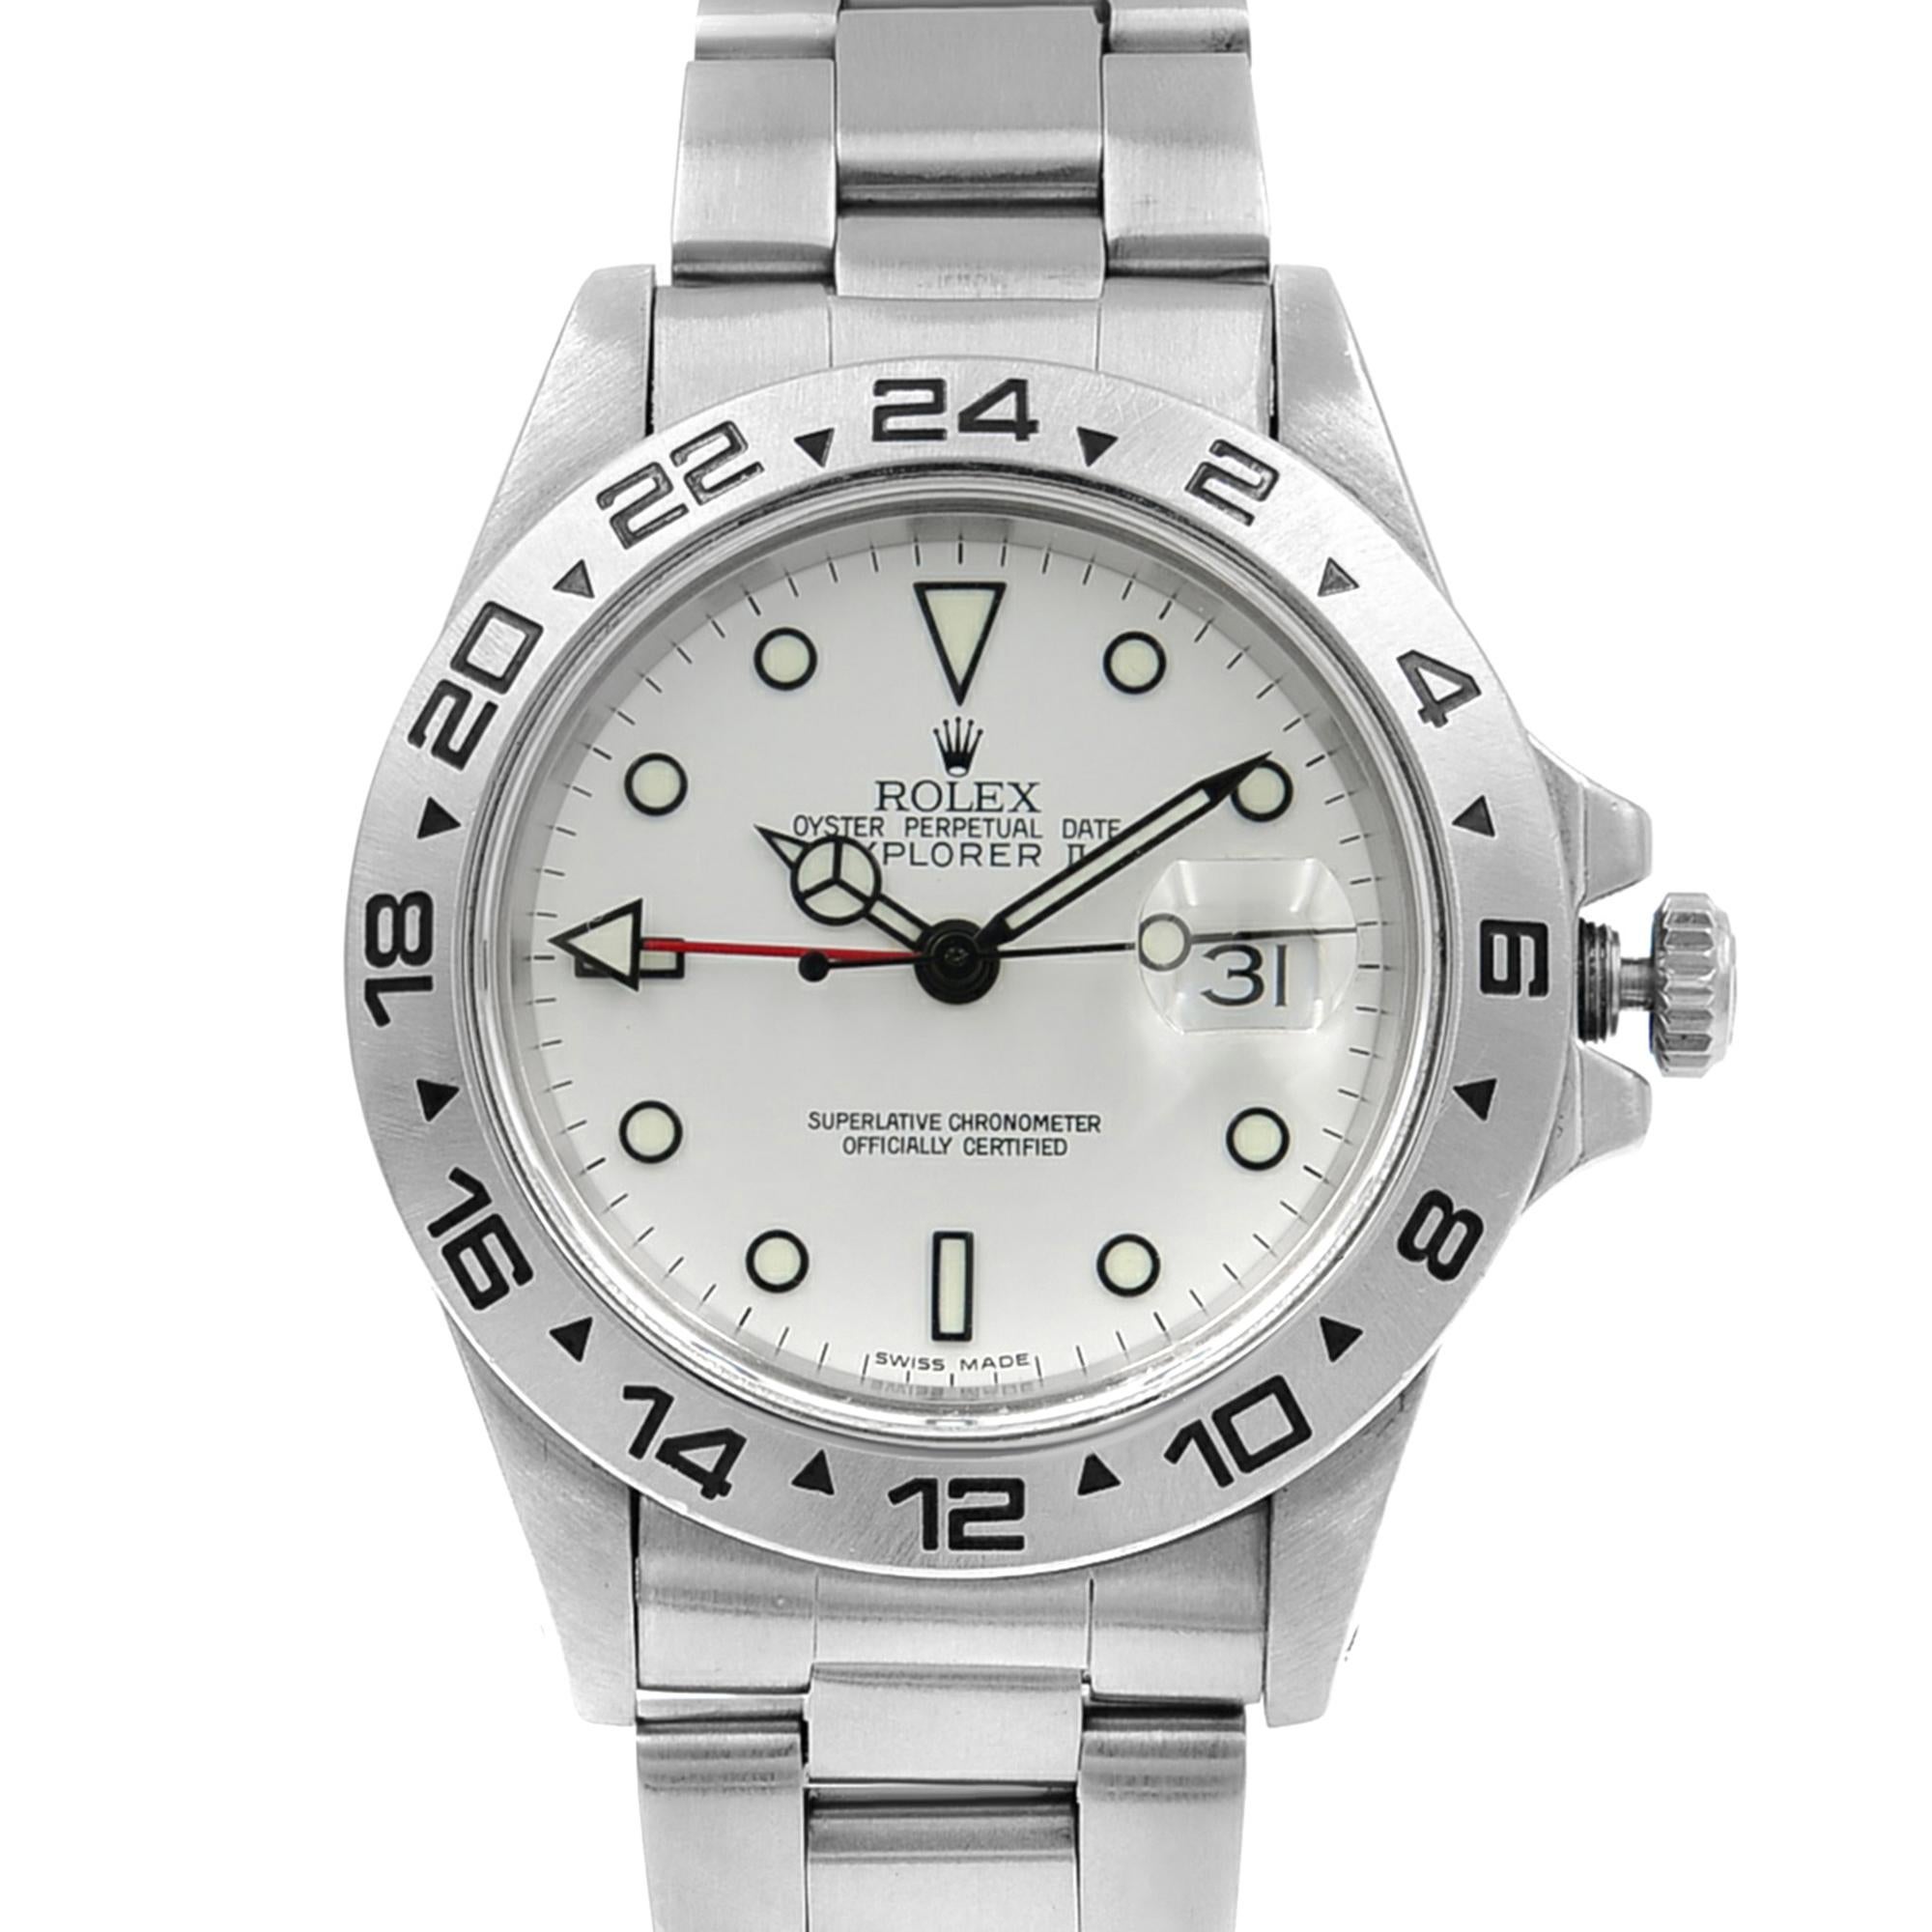 This pre-owned Rolex Explorer II 16550 is a beautiful men's timepiece that is powered by an automatic movement which is cased in a stainless steel case. It has a round shape face, date, dual time dial and has hand sticks & dots style markers. It is